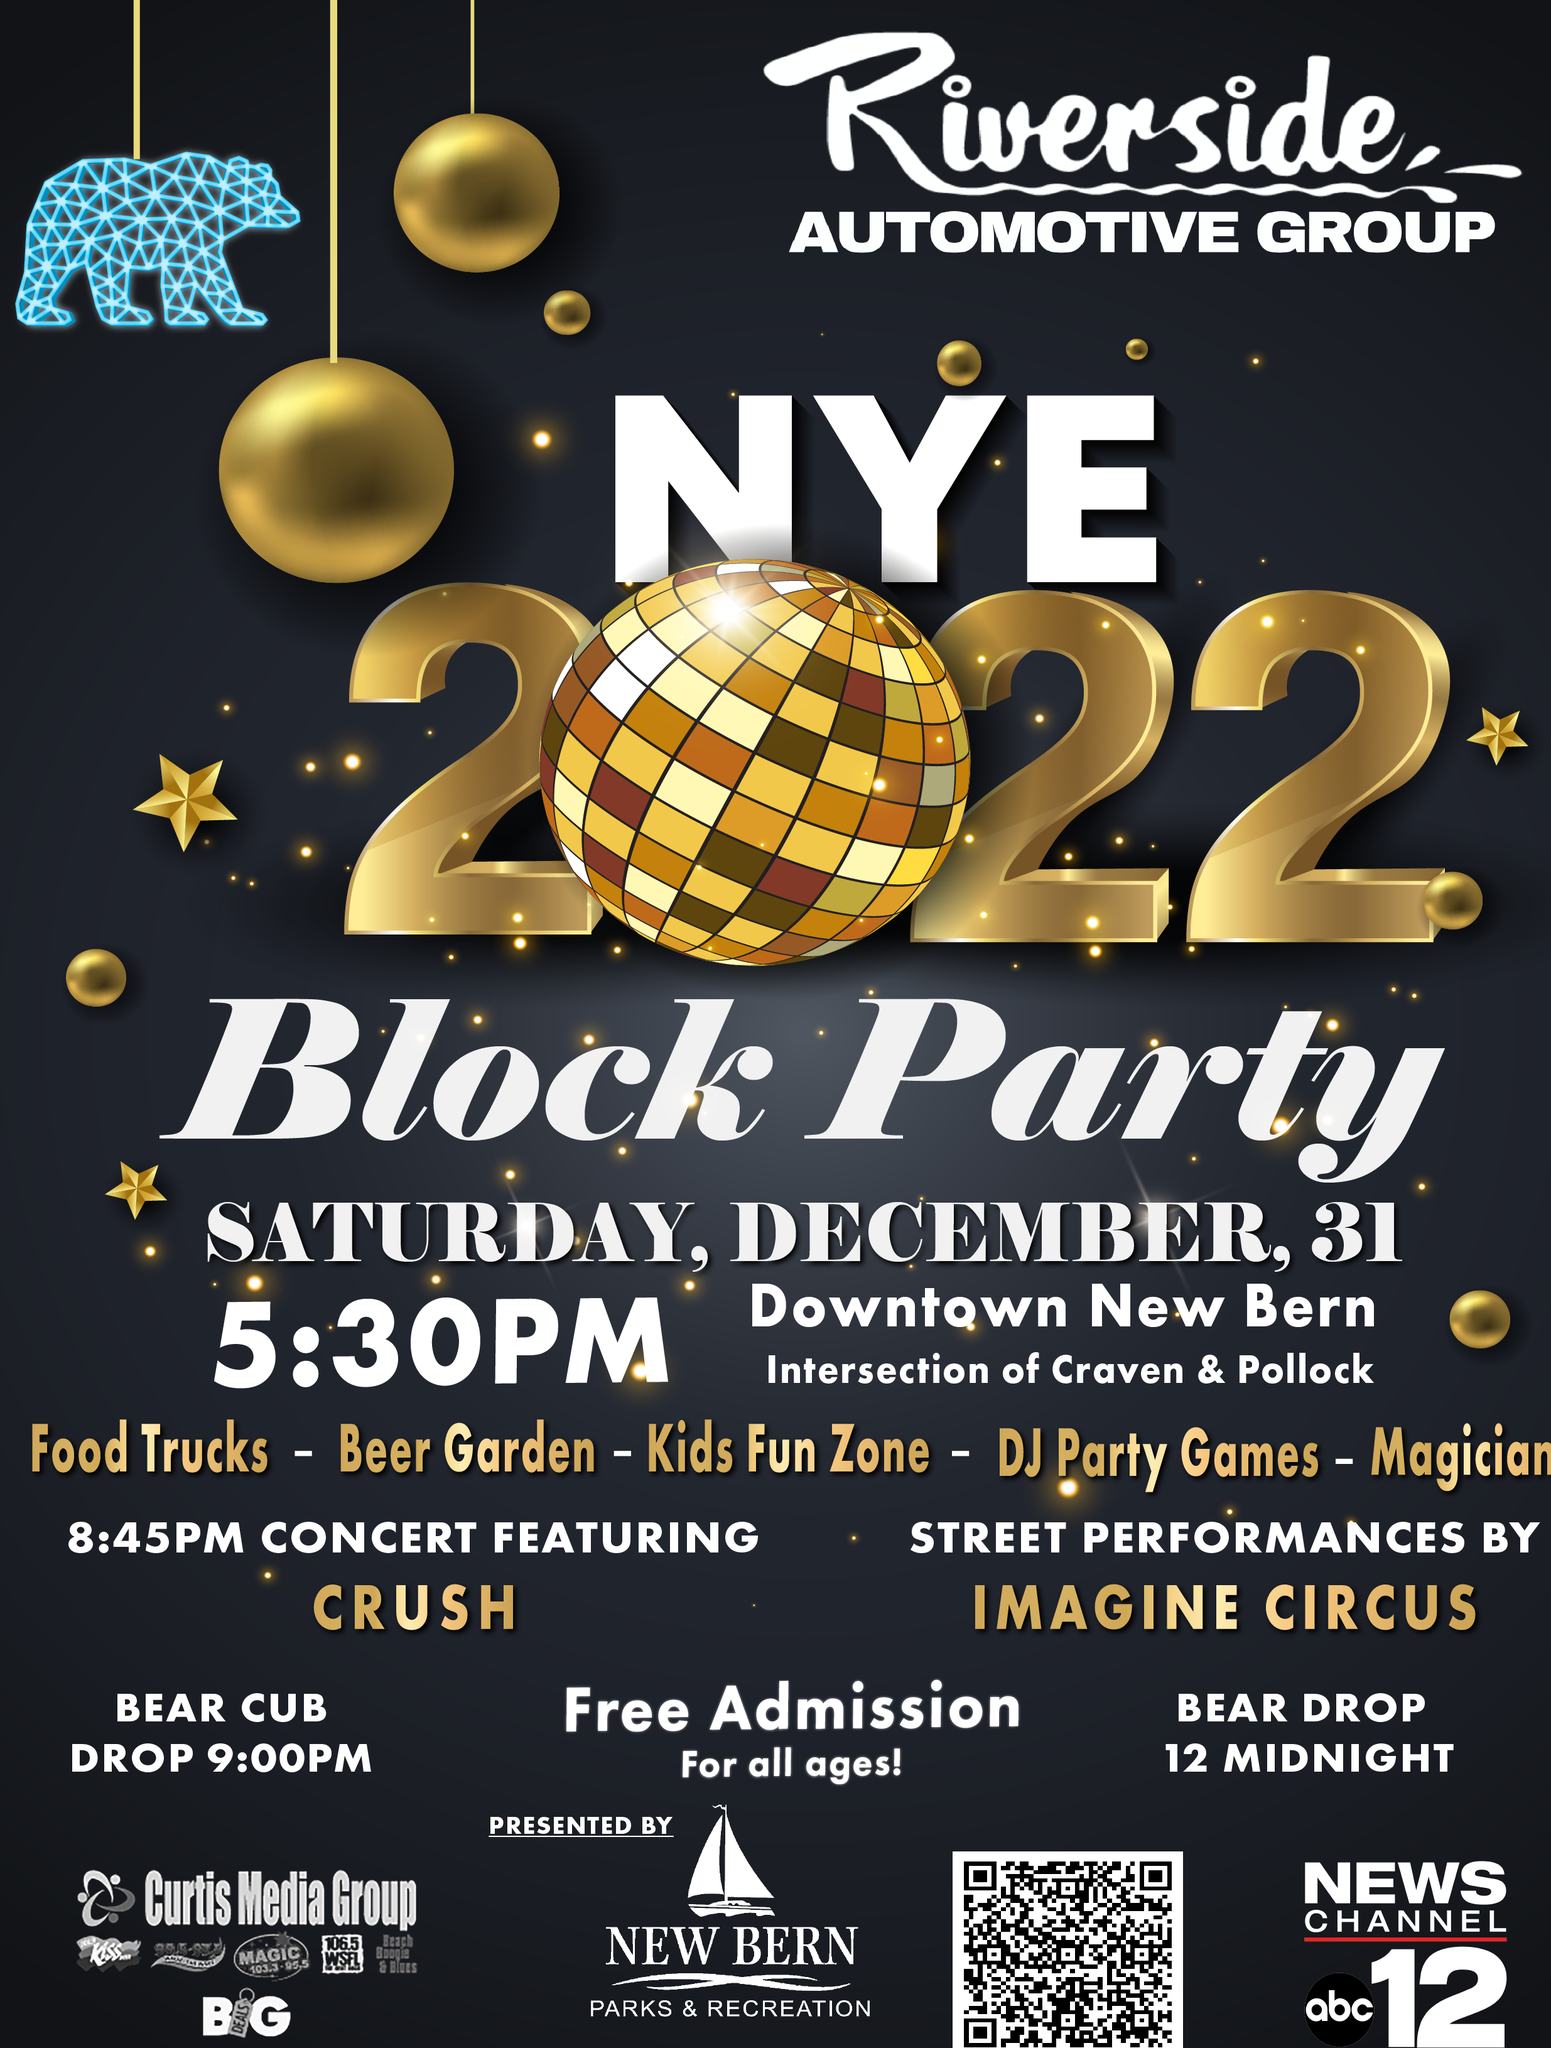 New Year’s Eve Block Party in New Bern